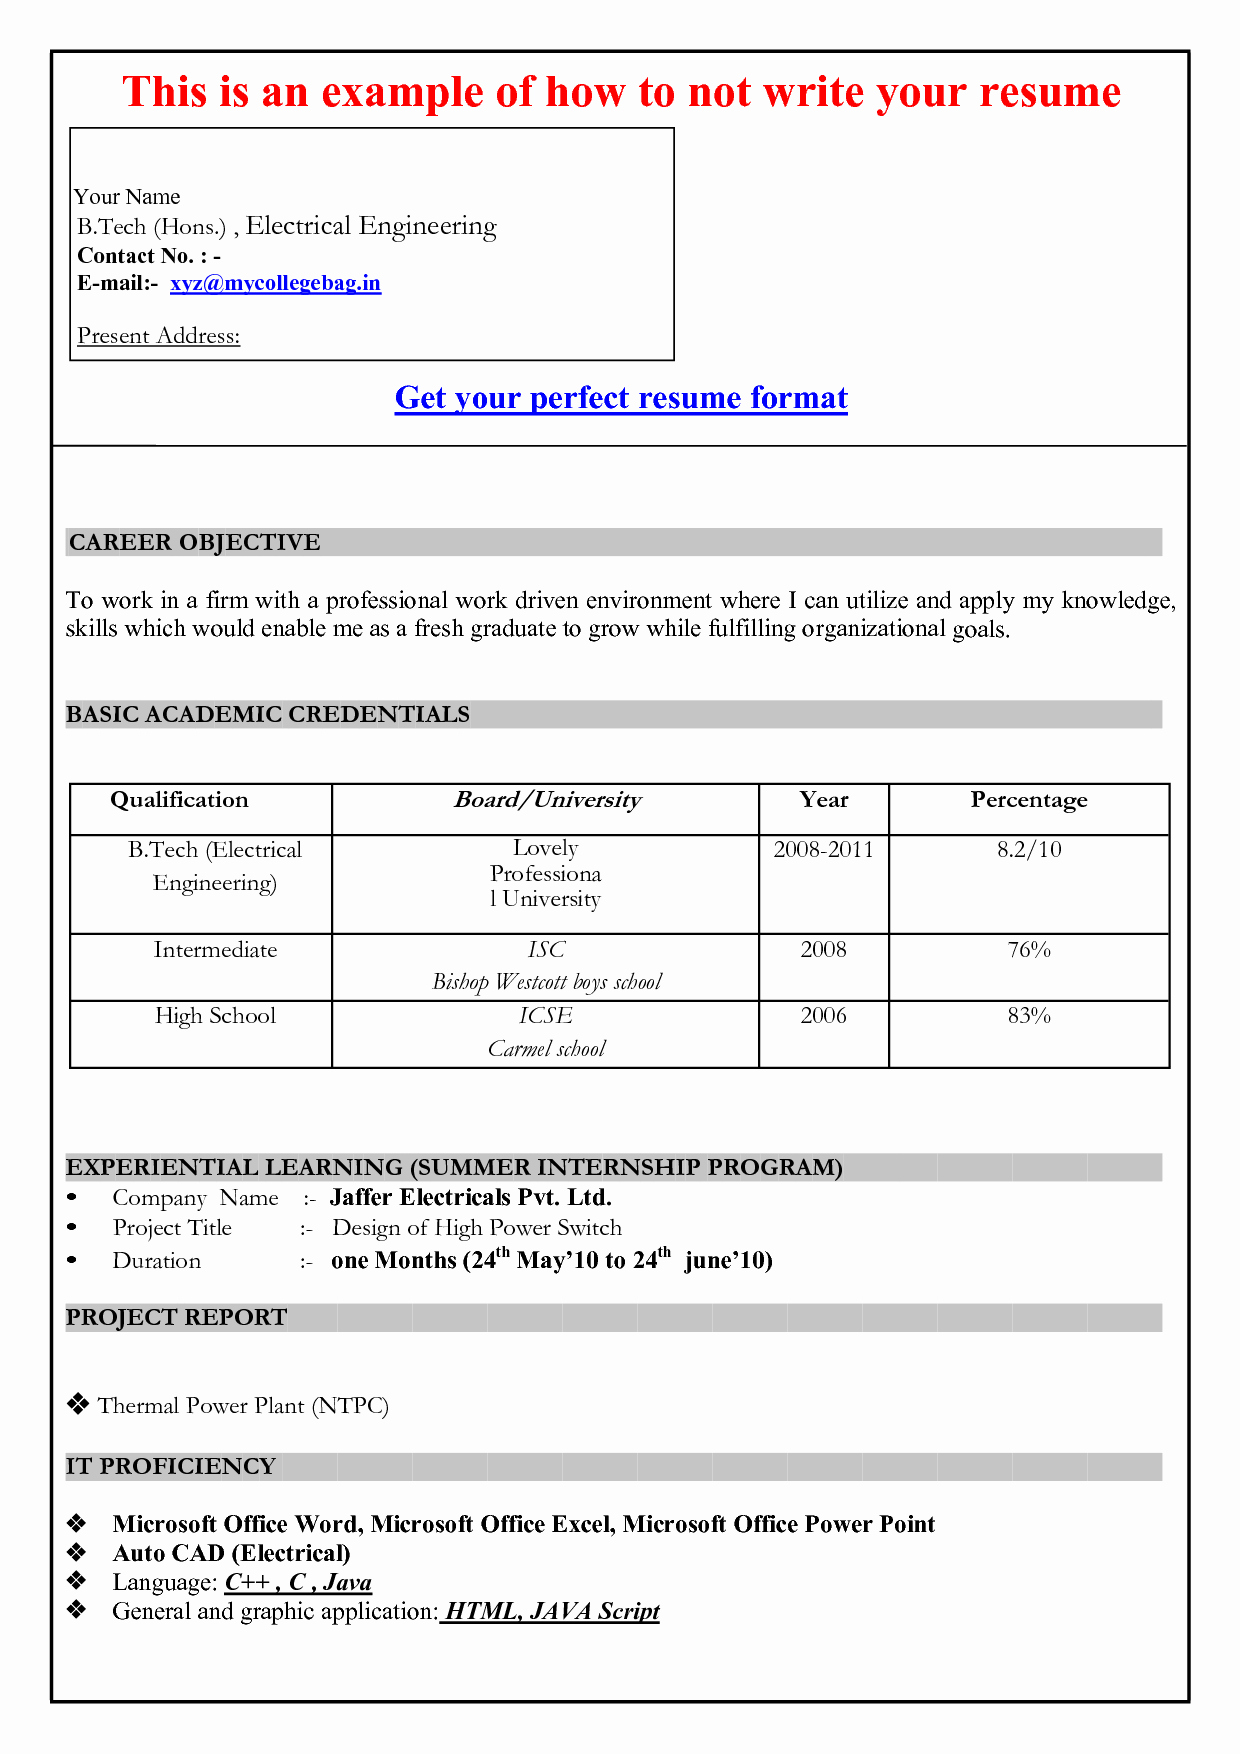 Ms Word 2007 Resume Templates Unique Resume Templates Microsoft Word 2007 for Mac